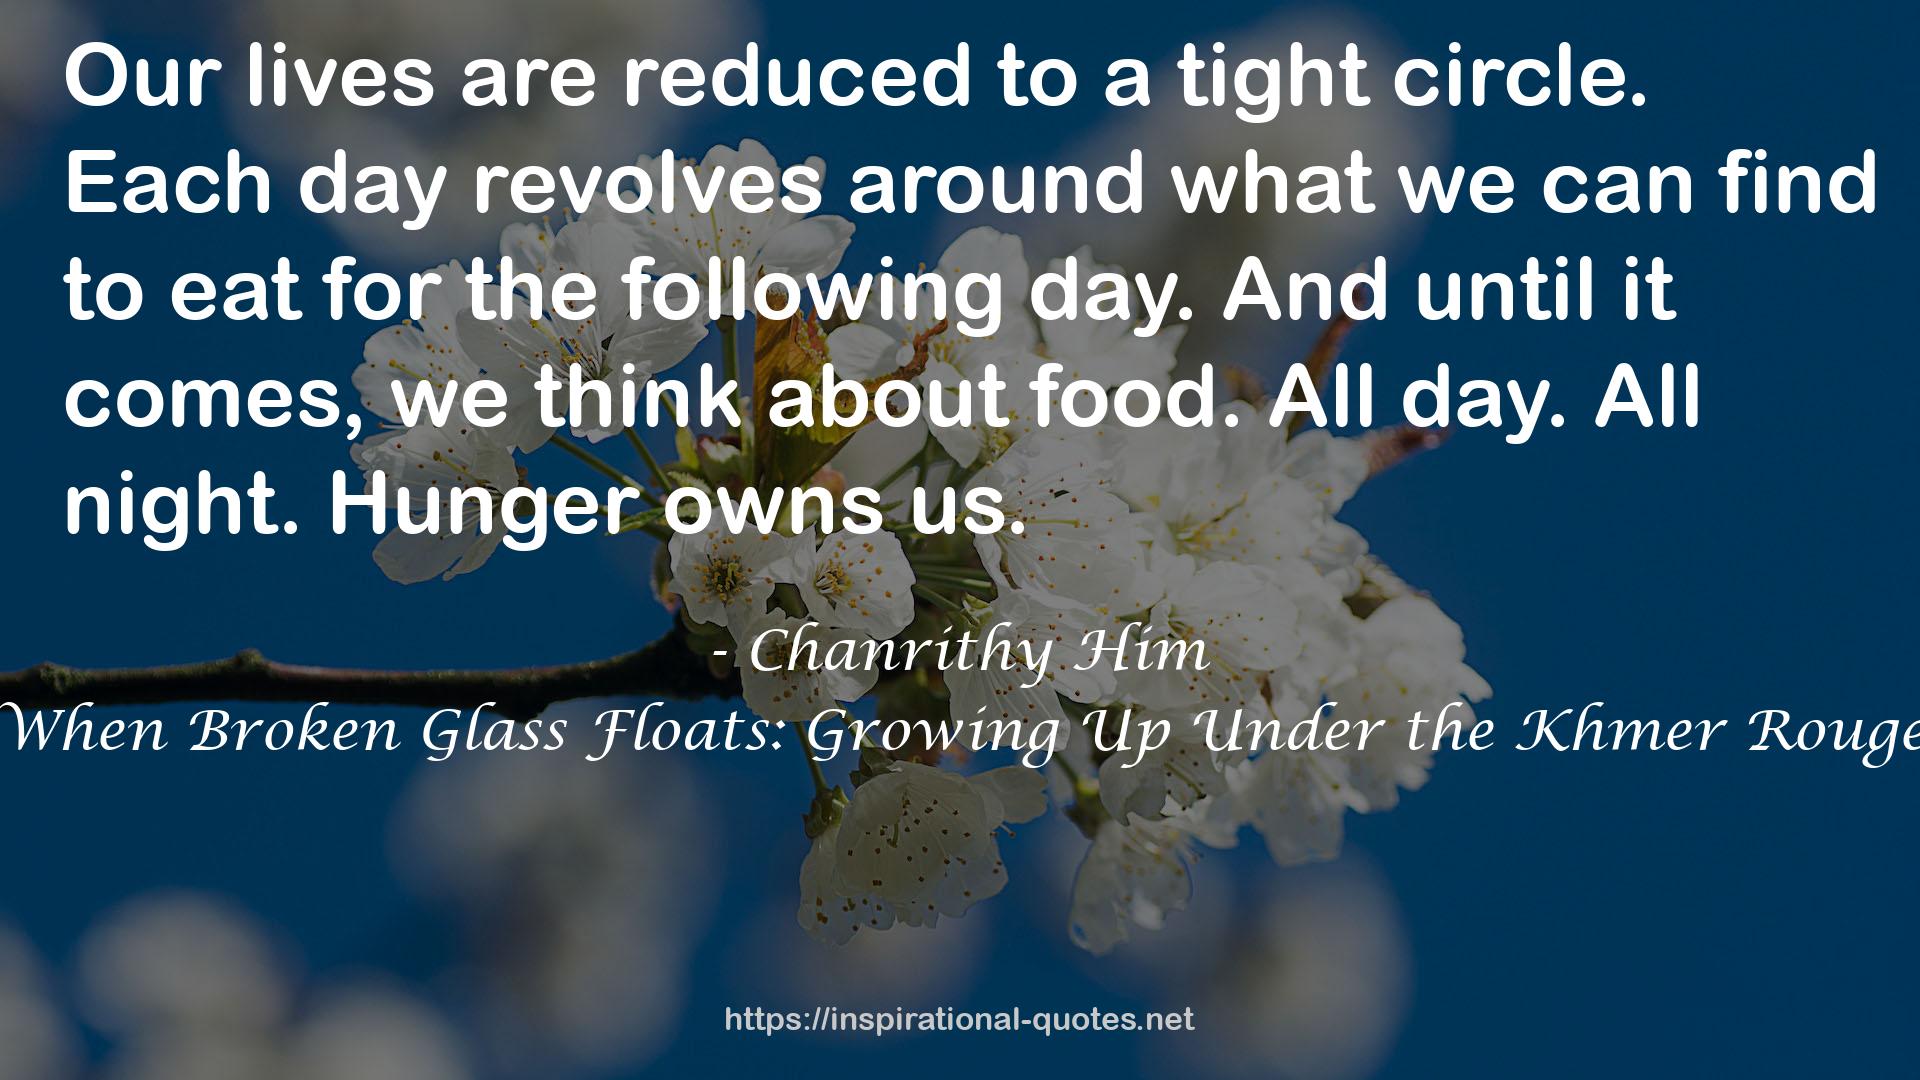 When Broken Glass Floats: Growing Up Under the Khmer Rouge QUOTES